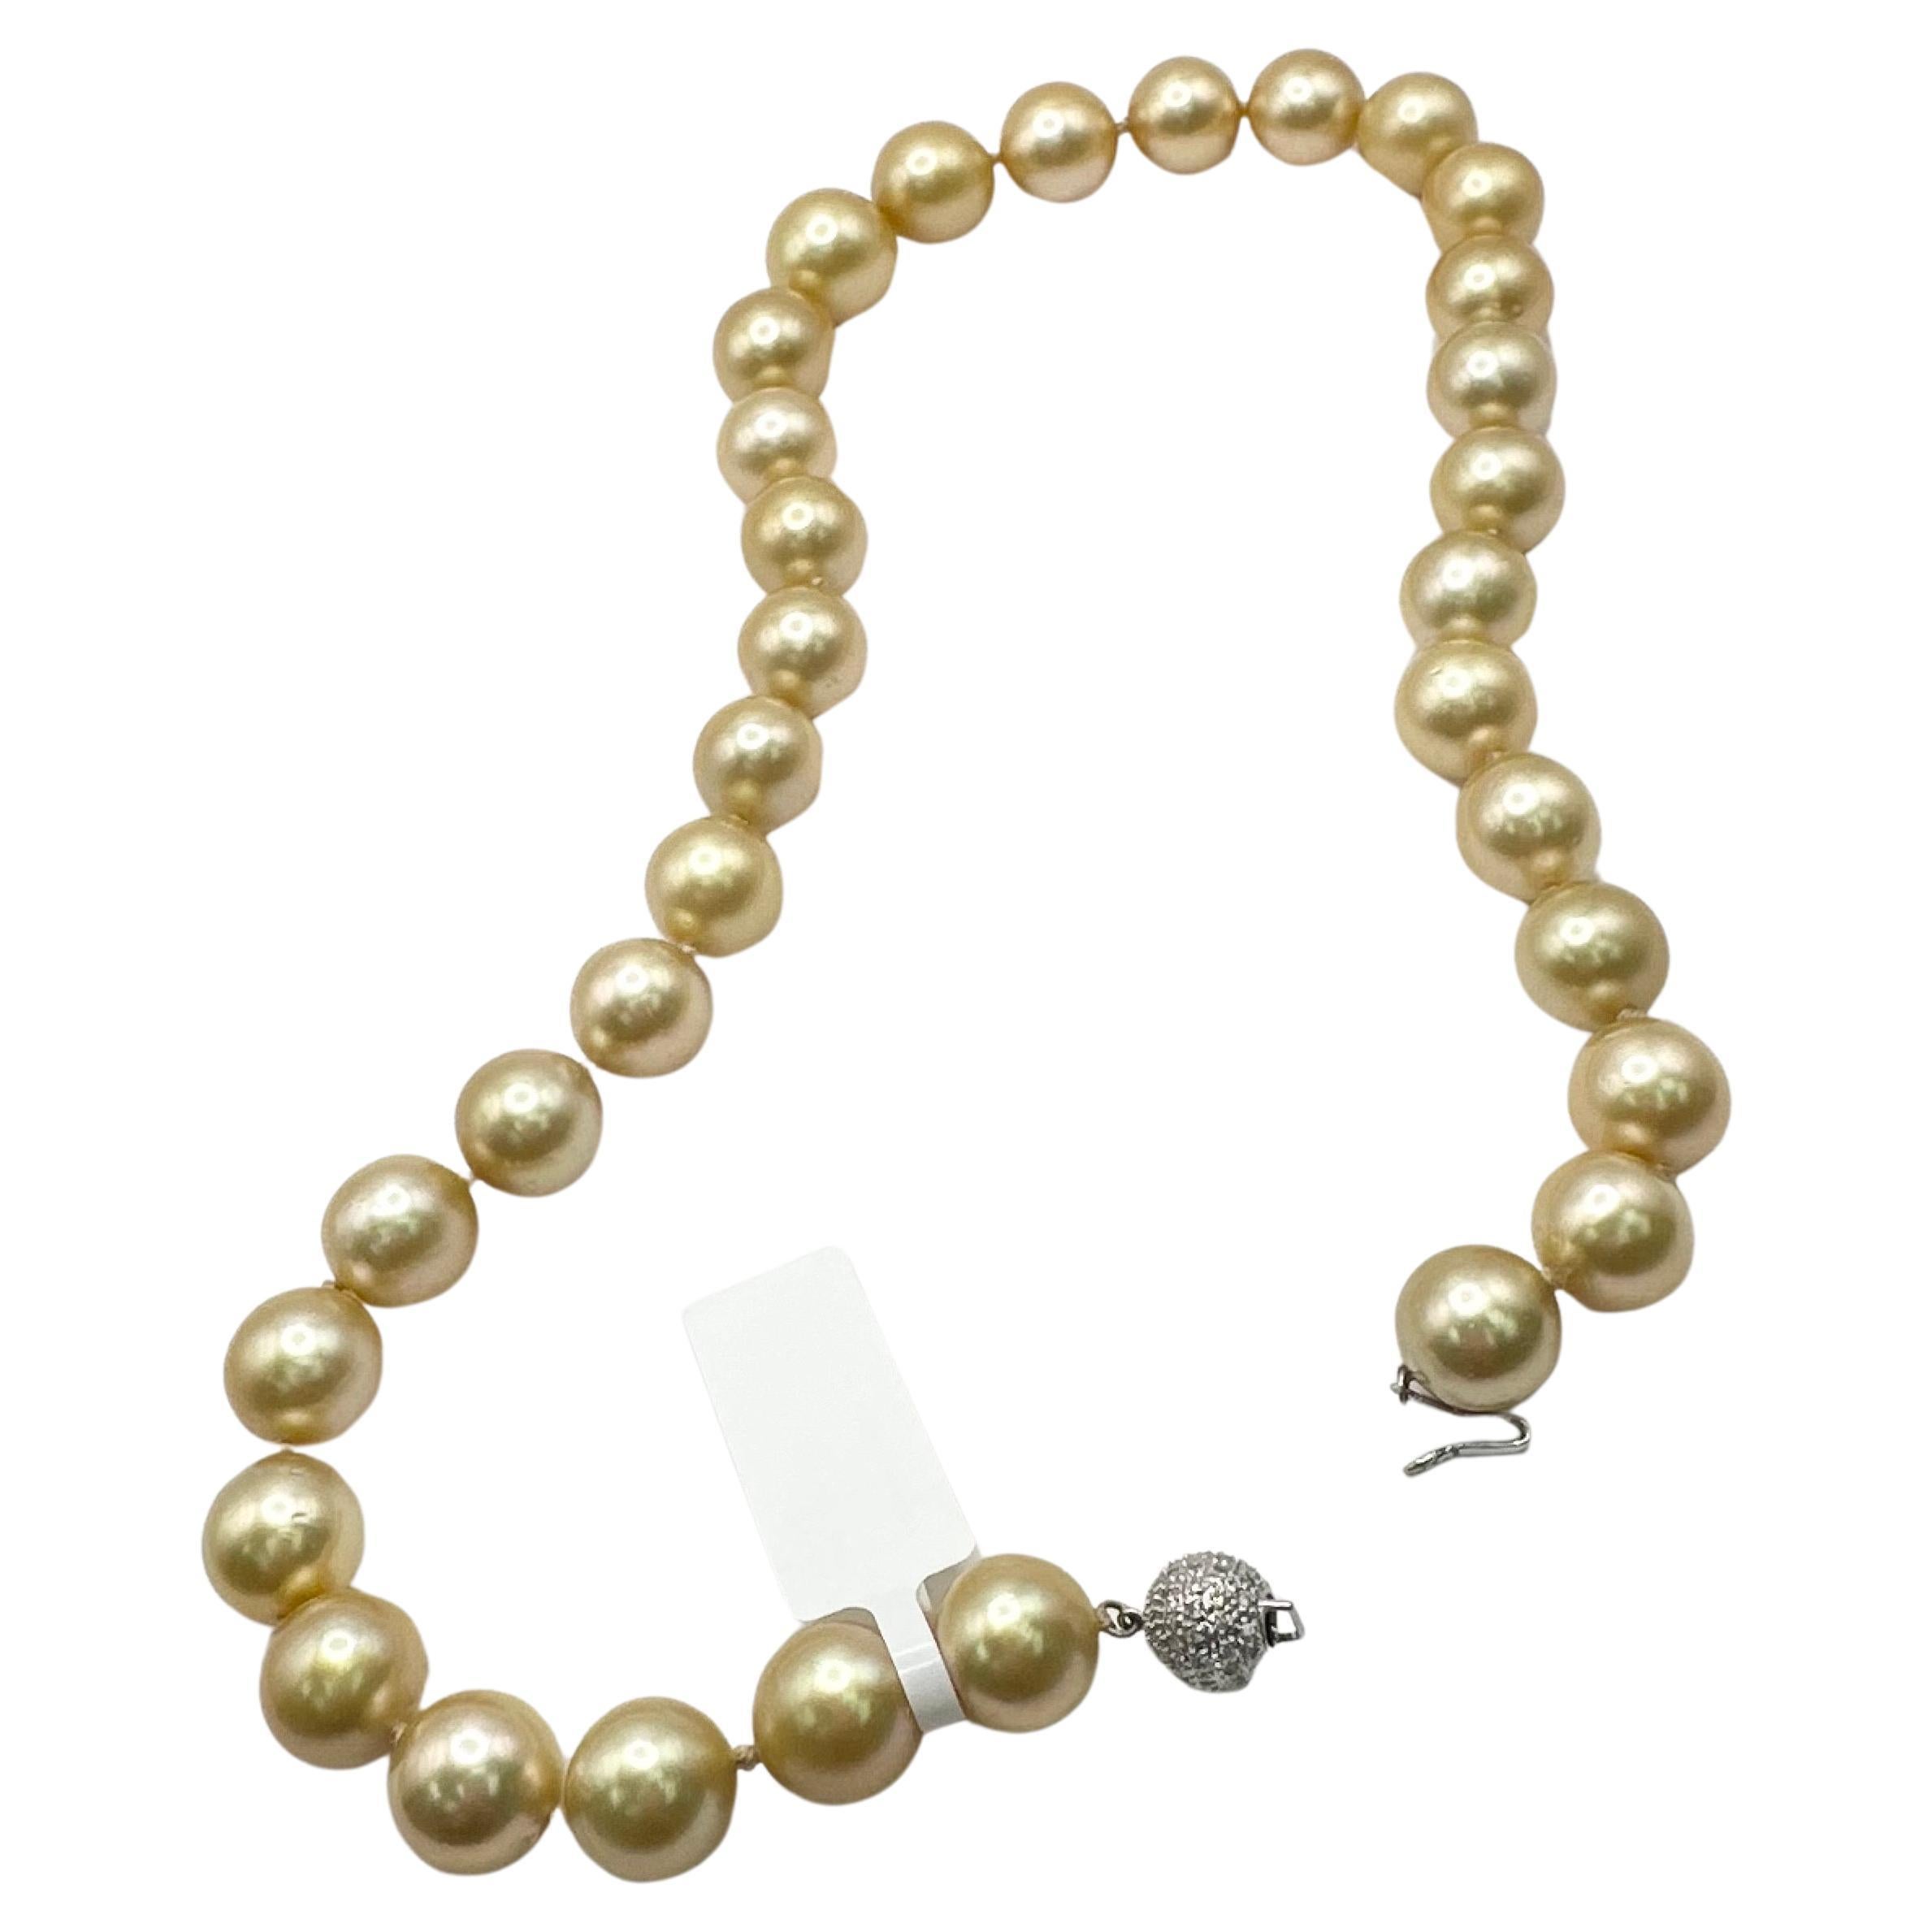 Diamond South Pearl necklace 18" 13mm-16mm 14KT 